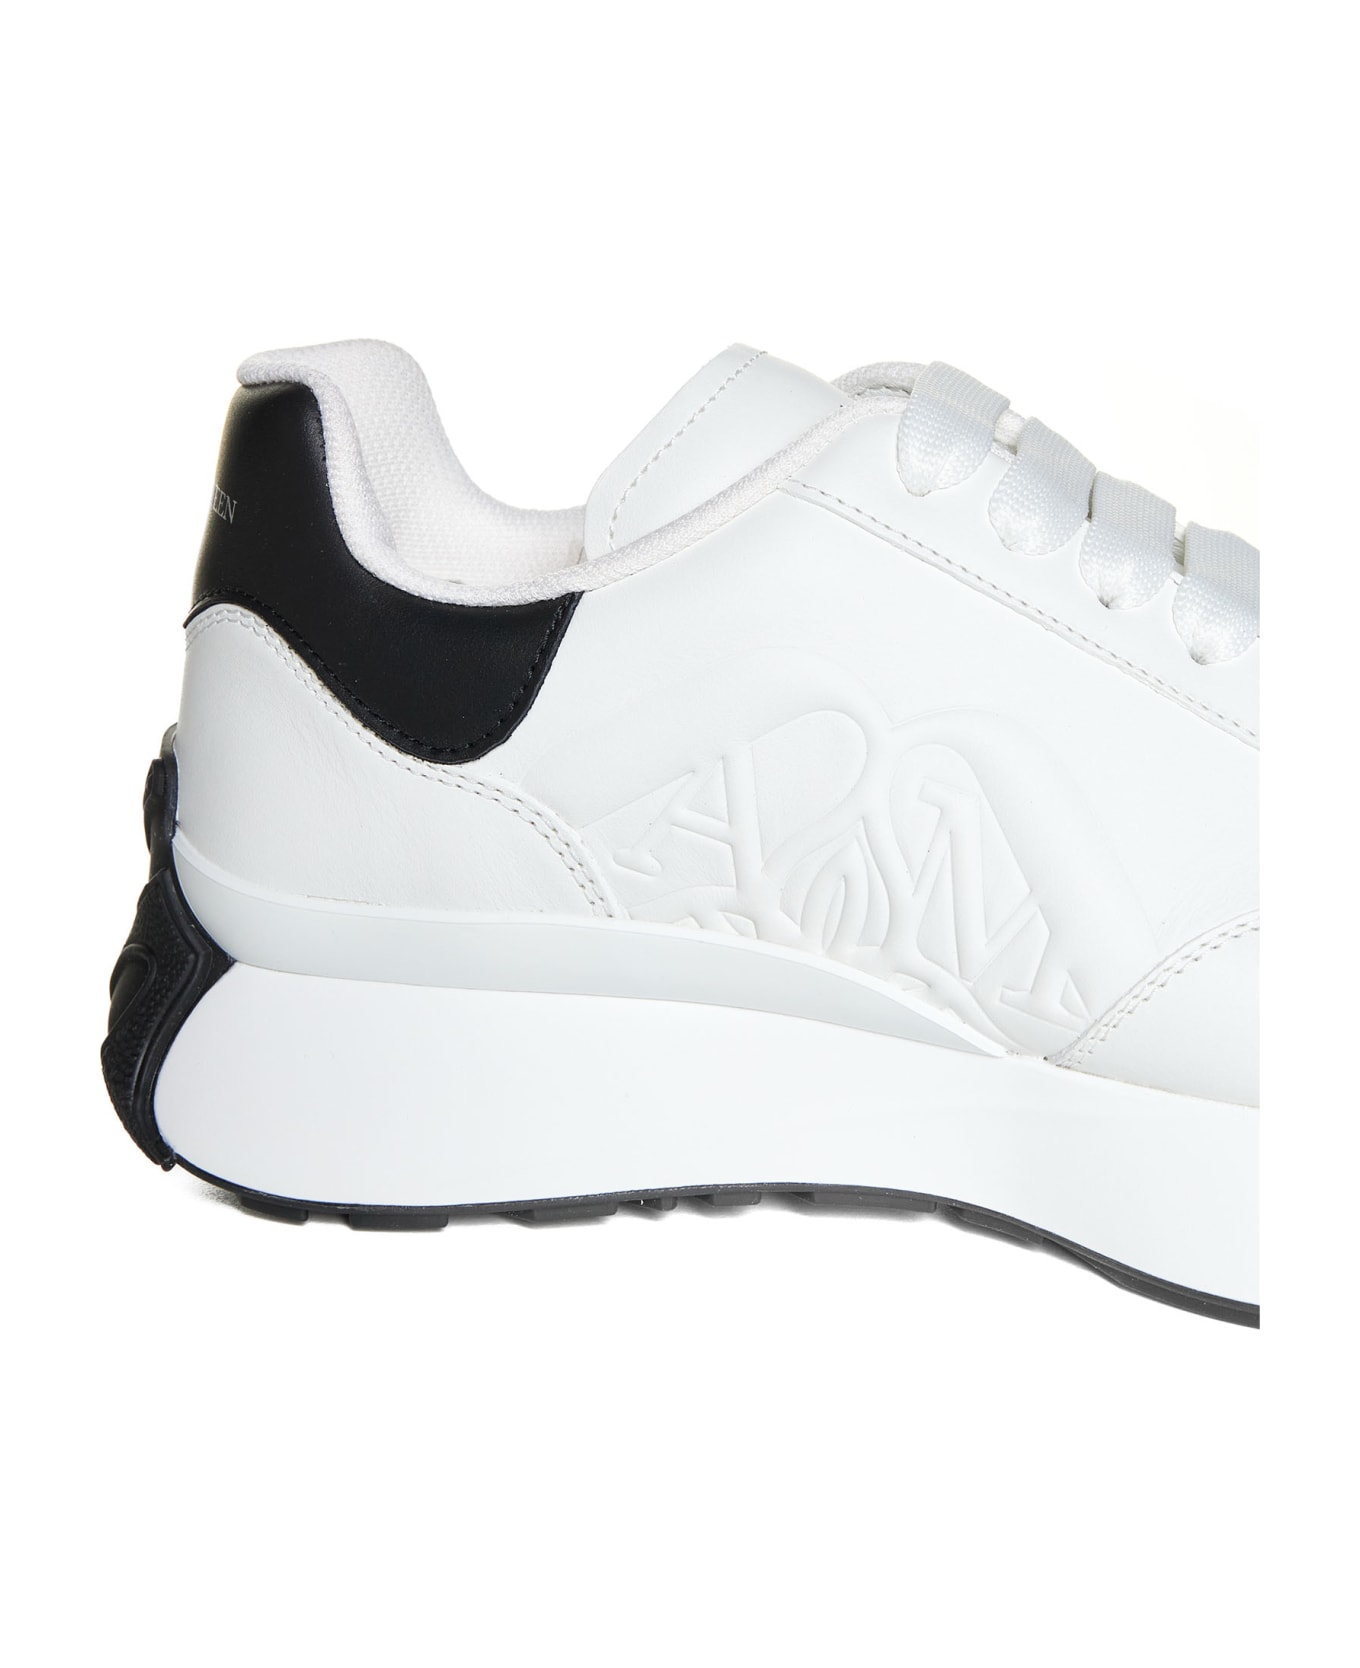 Alexander McQueen Leather Sneakers - White スニーカー